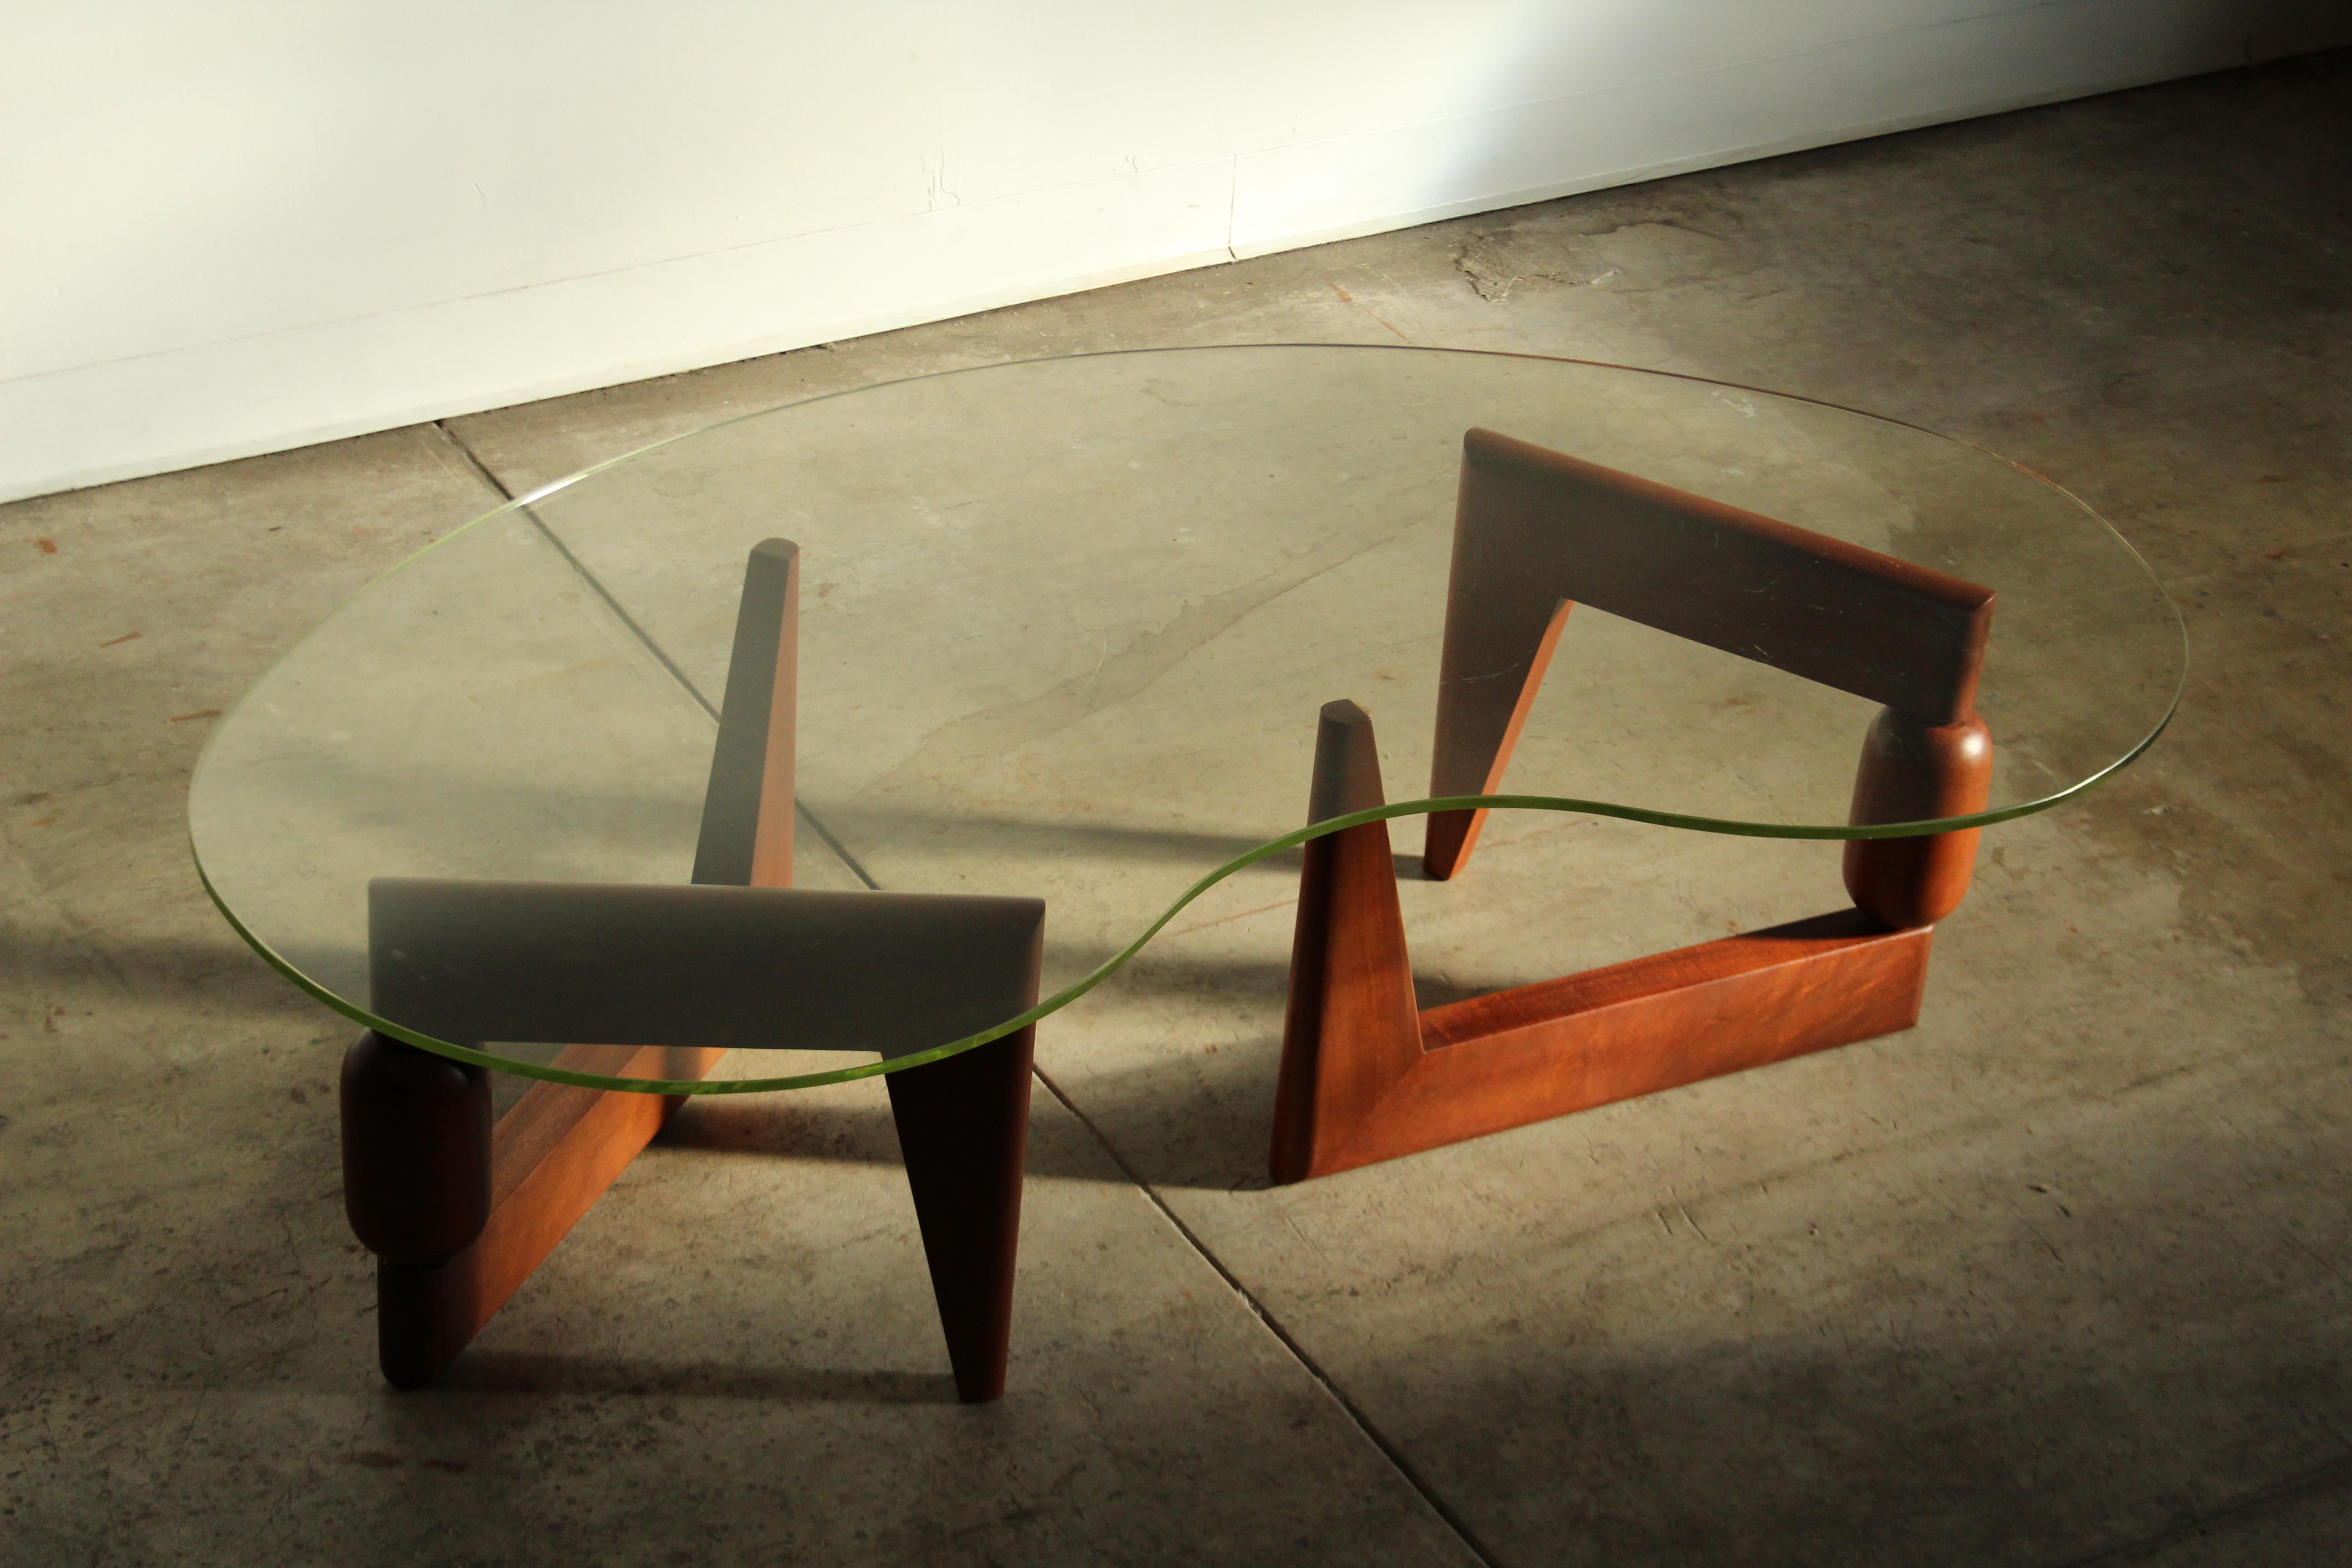 Sculptural Freeform Coffee Table in the Manner of Isamu Noguchi, 1970s For Sale 5